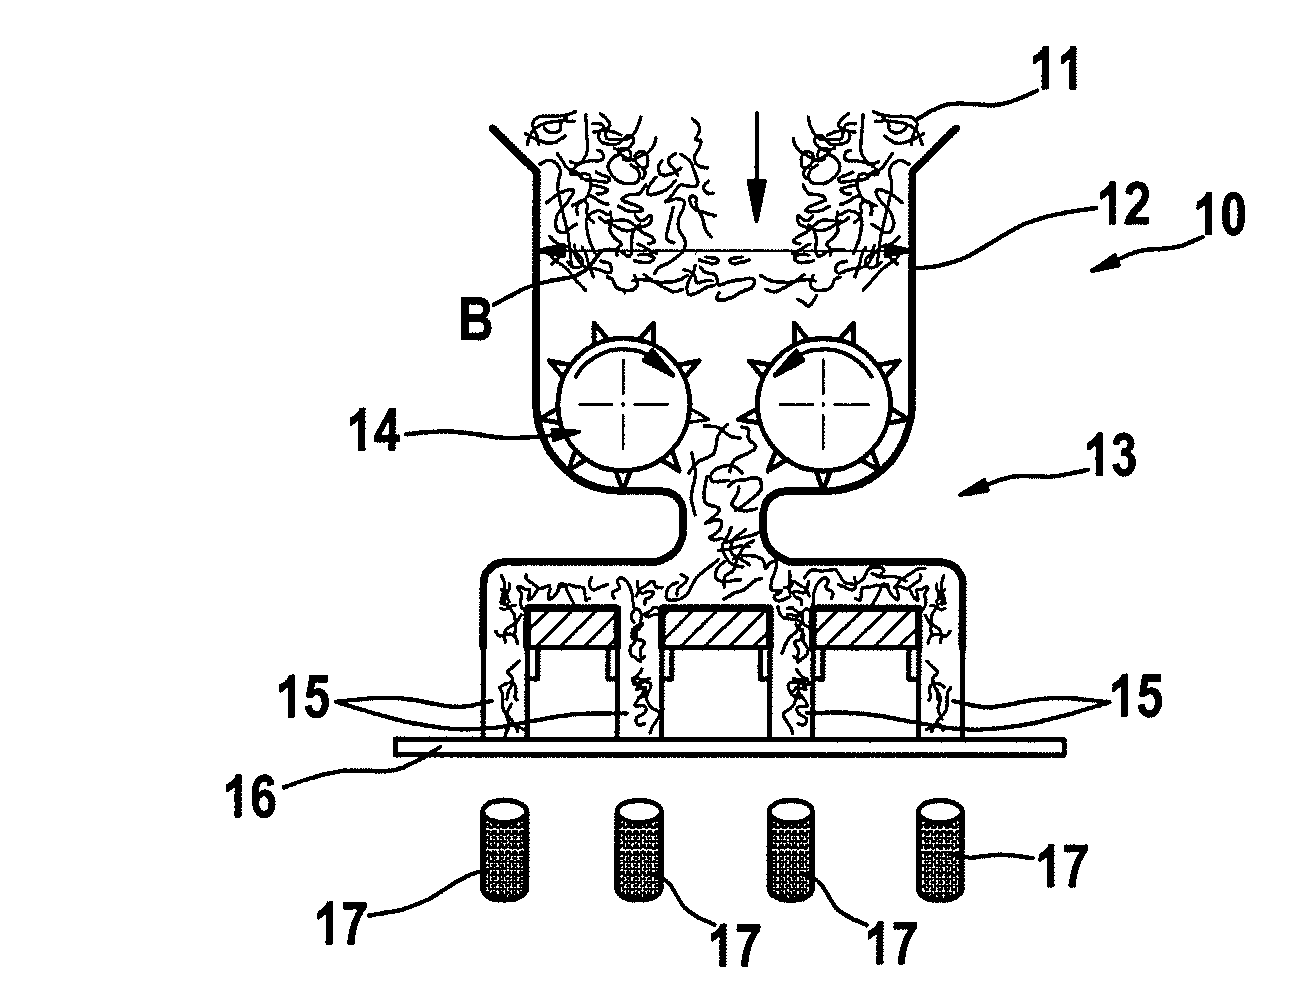 Apparatus and method for metering oral tobacco in portions suitable for consumption